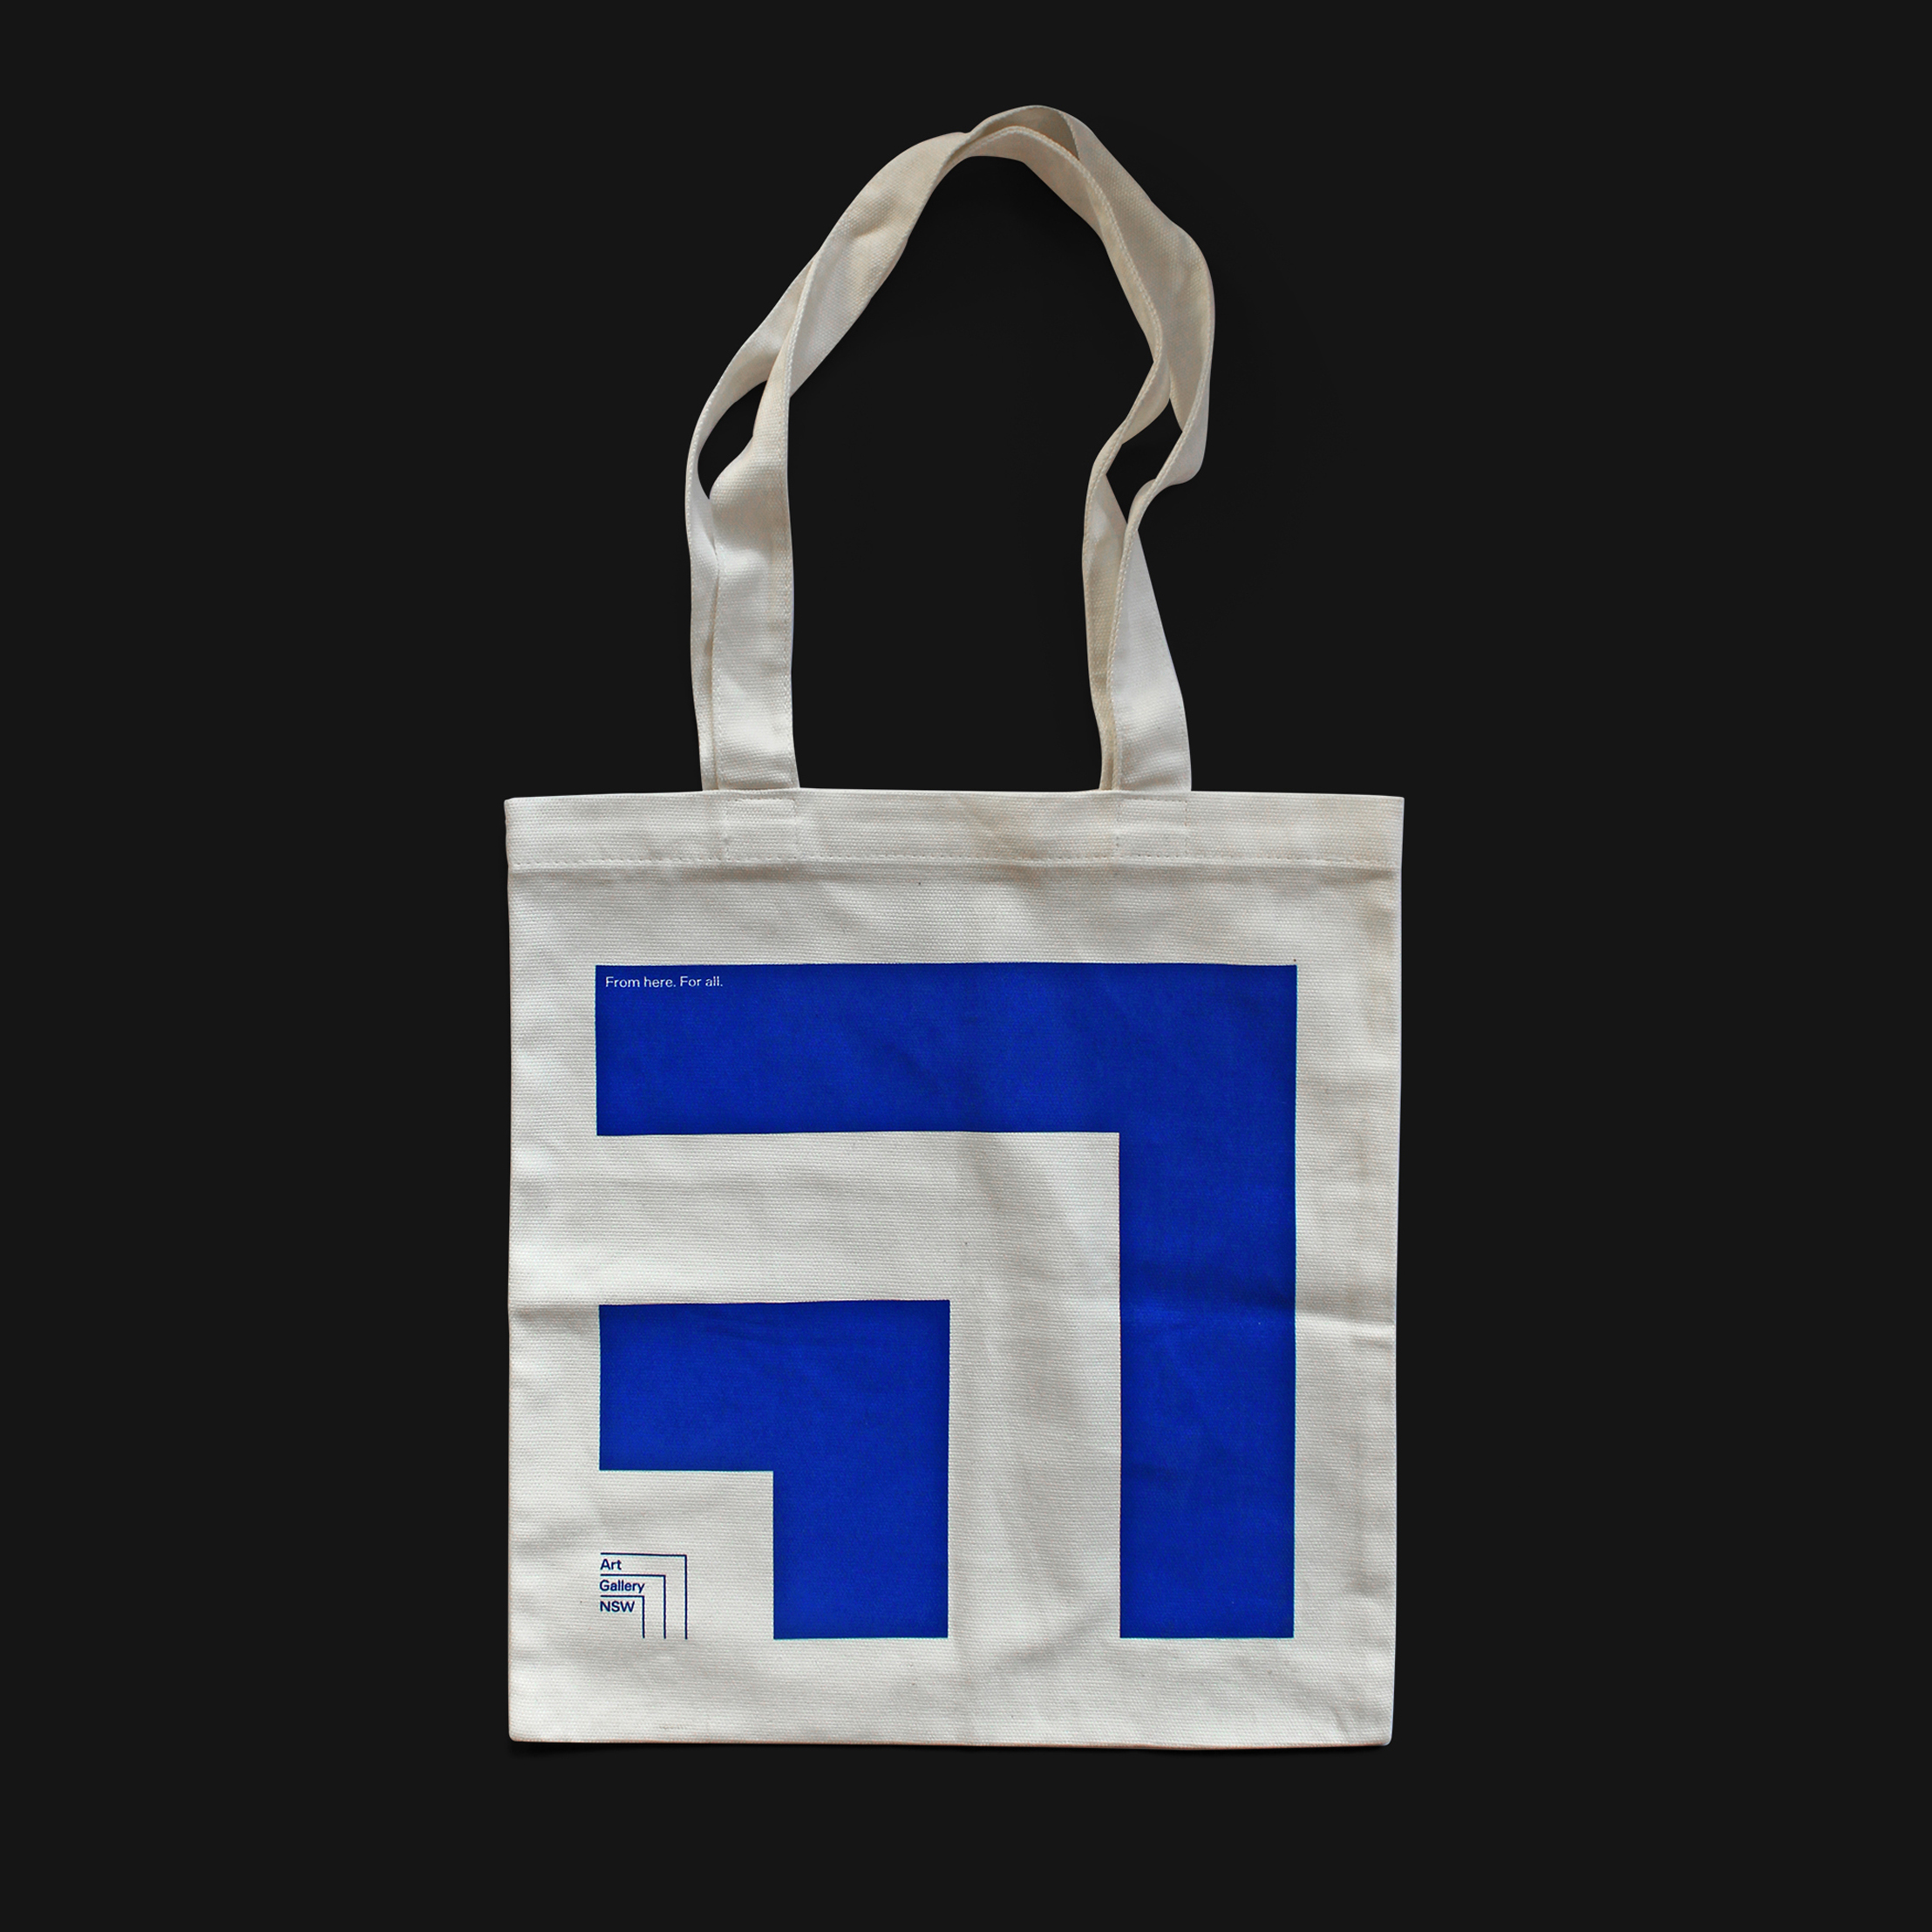 Logo and screen printed tote bag for Art Gallery of NSW designed by Mucho